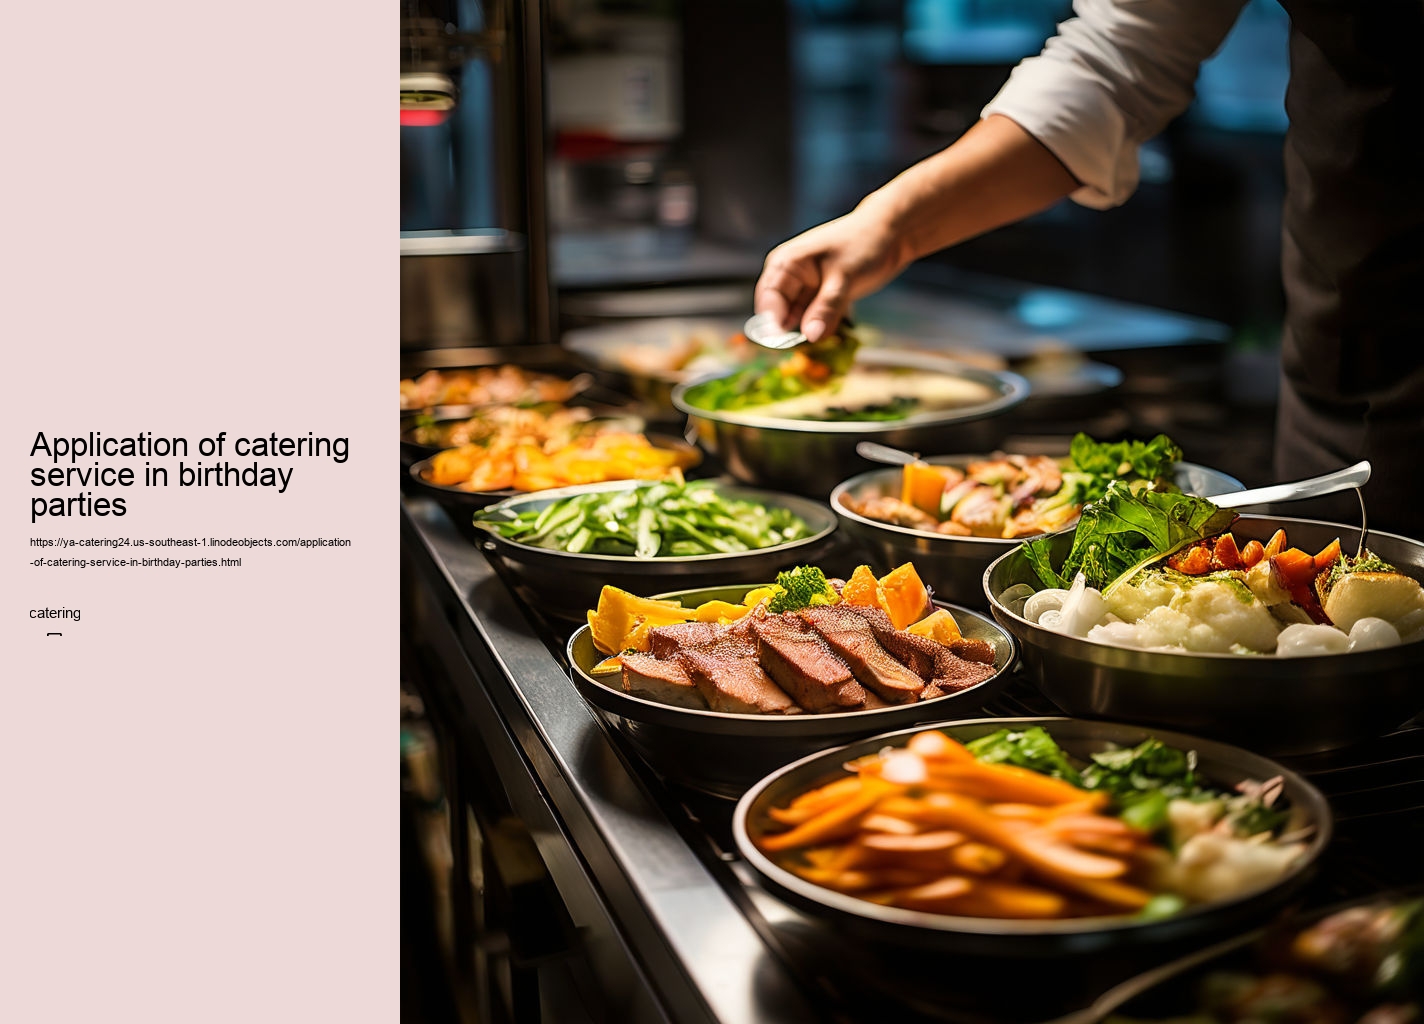 Application of catering service in birthday parties